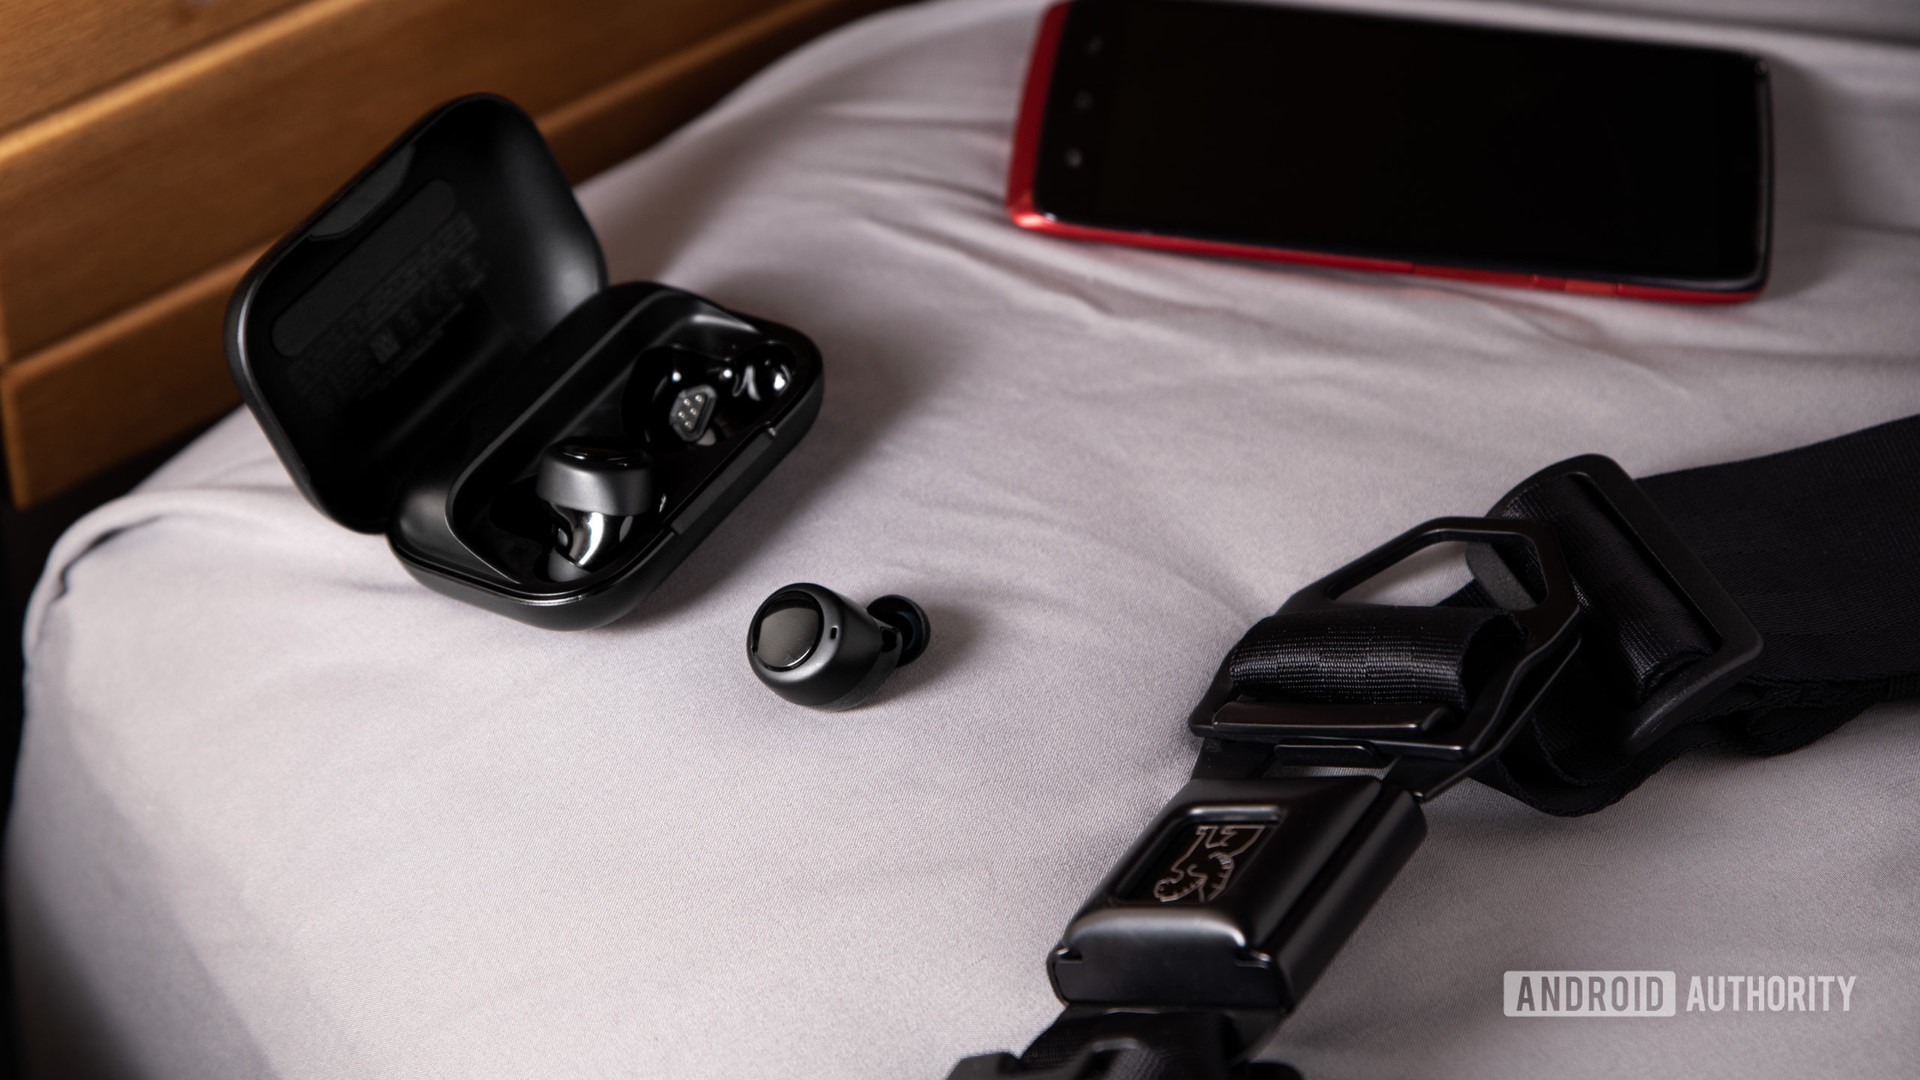 The Amazon Echo Buds true wireless earbuds outside of the open charging case next to a red smartphone.